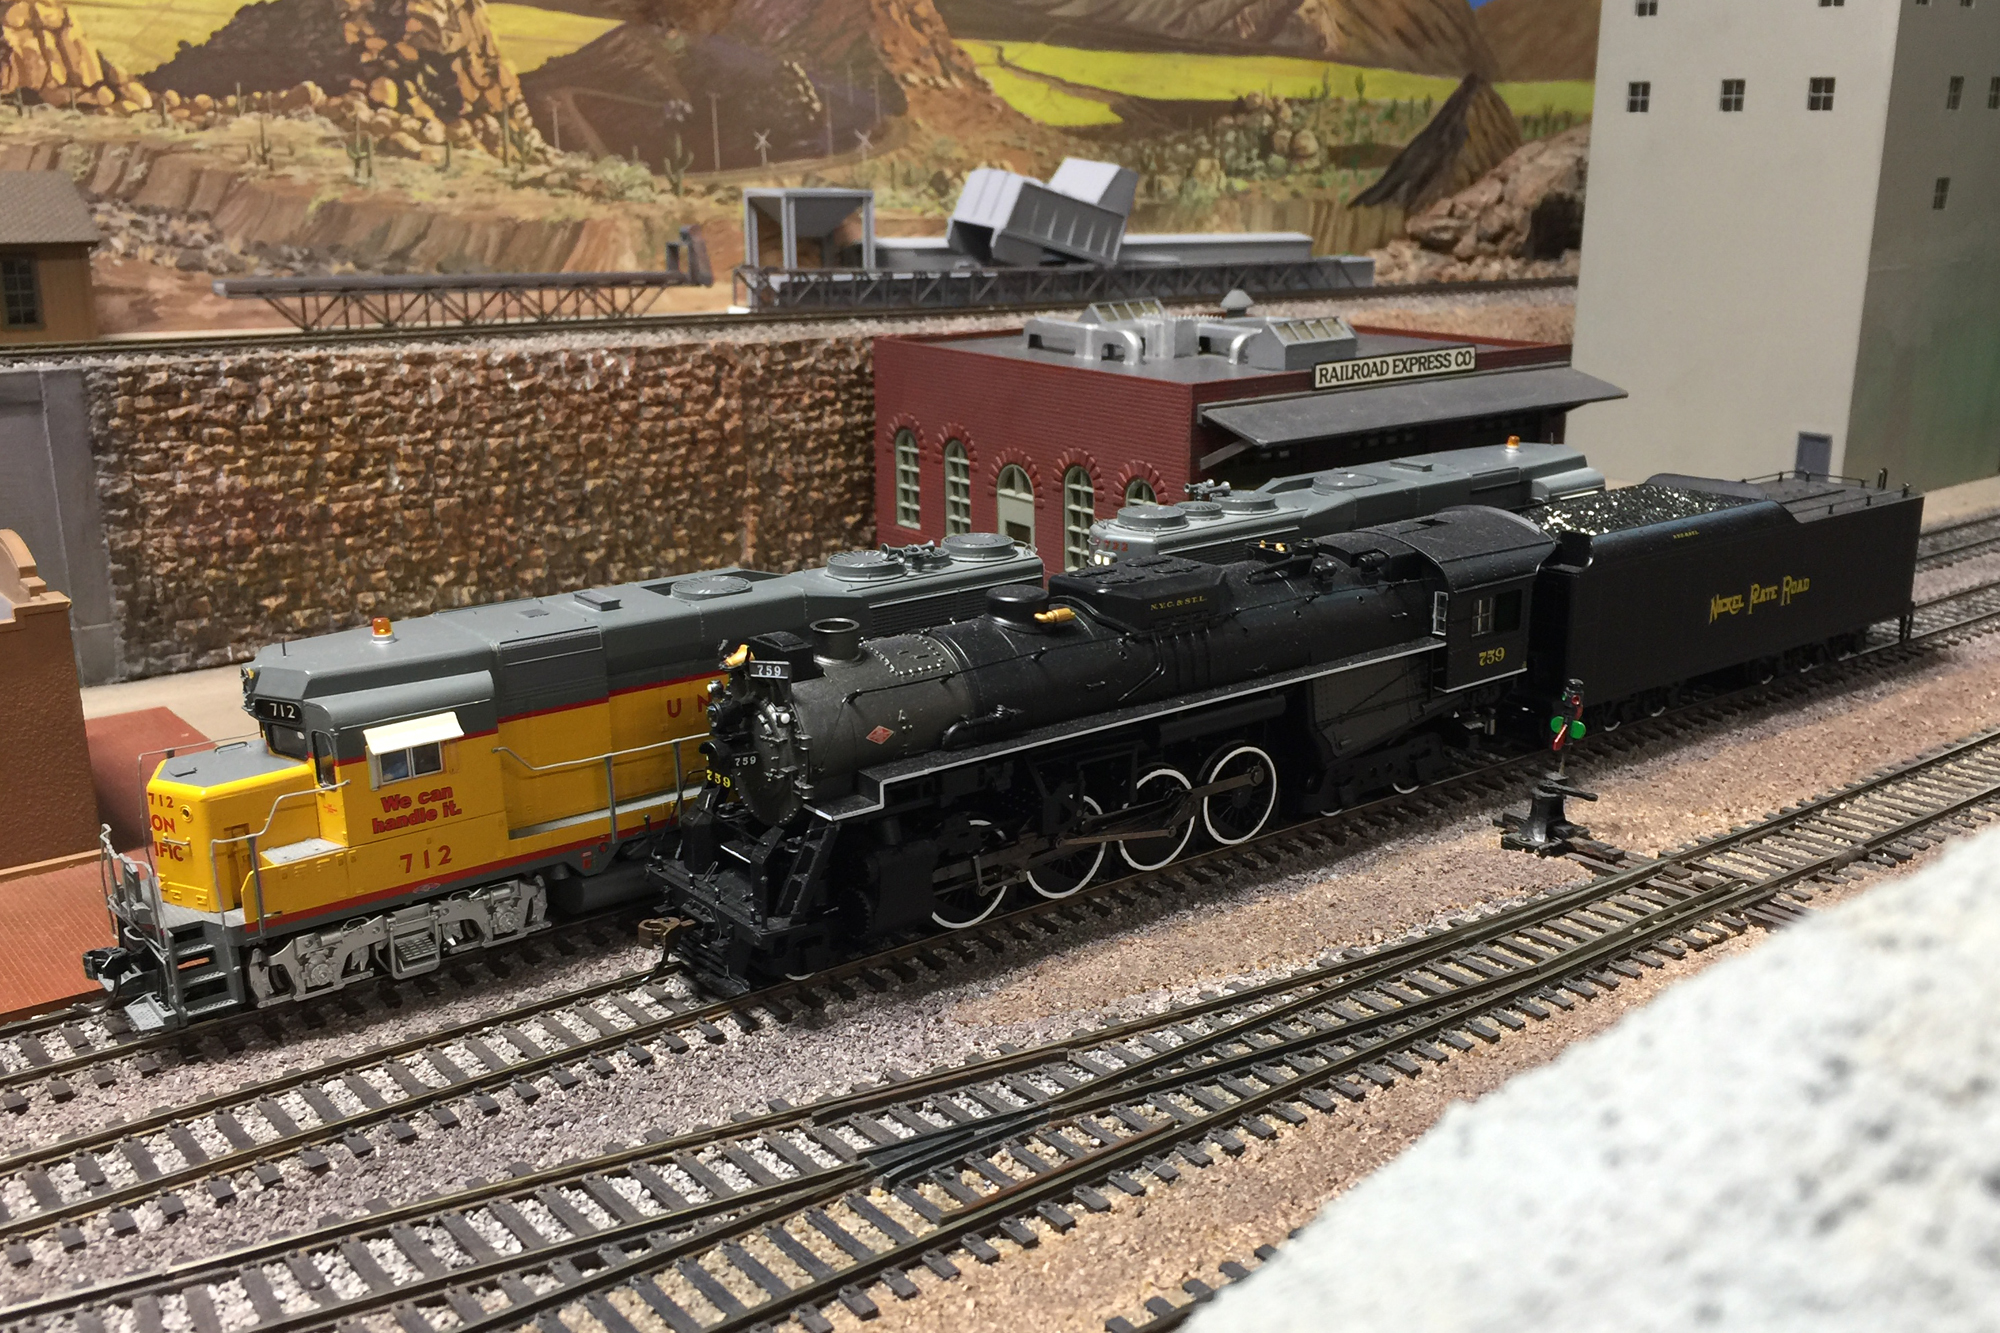 San Diego Division Member Tim and his HO scale model railroad.